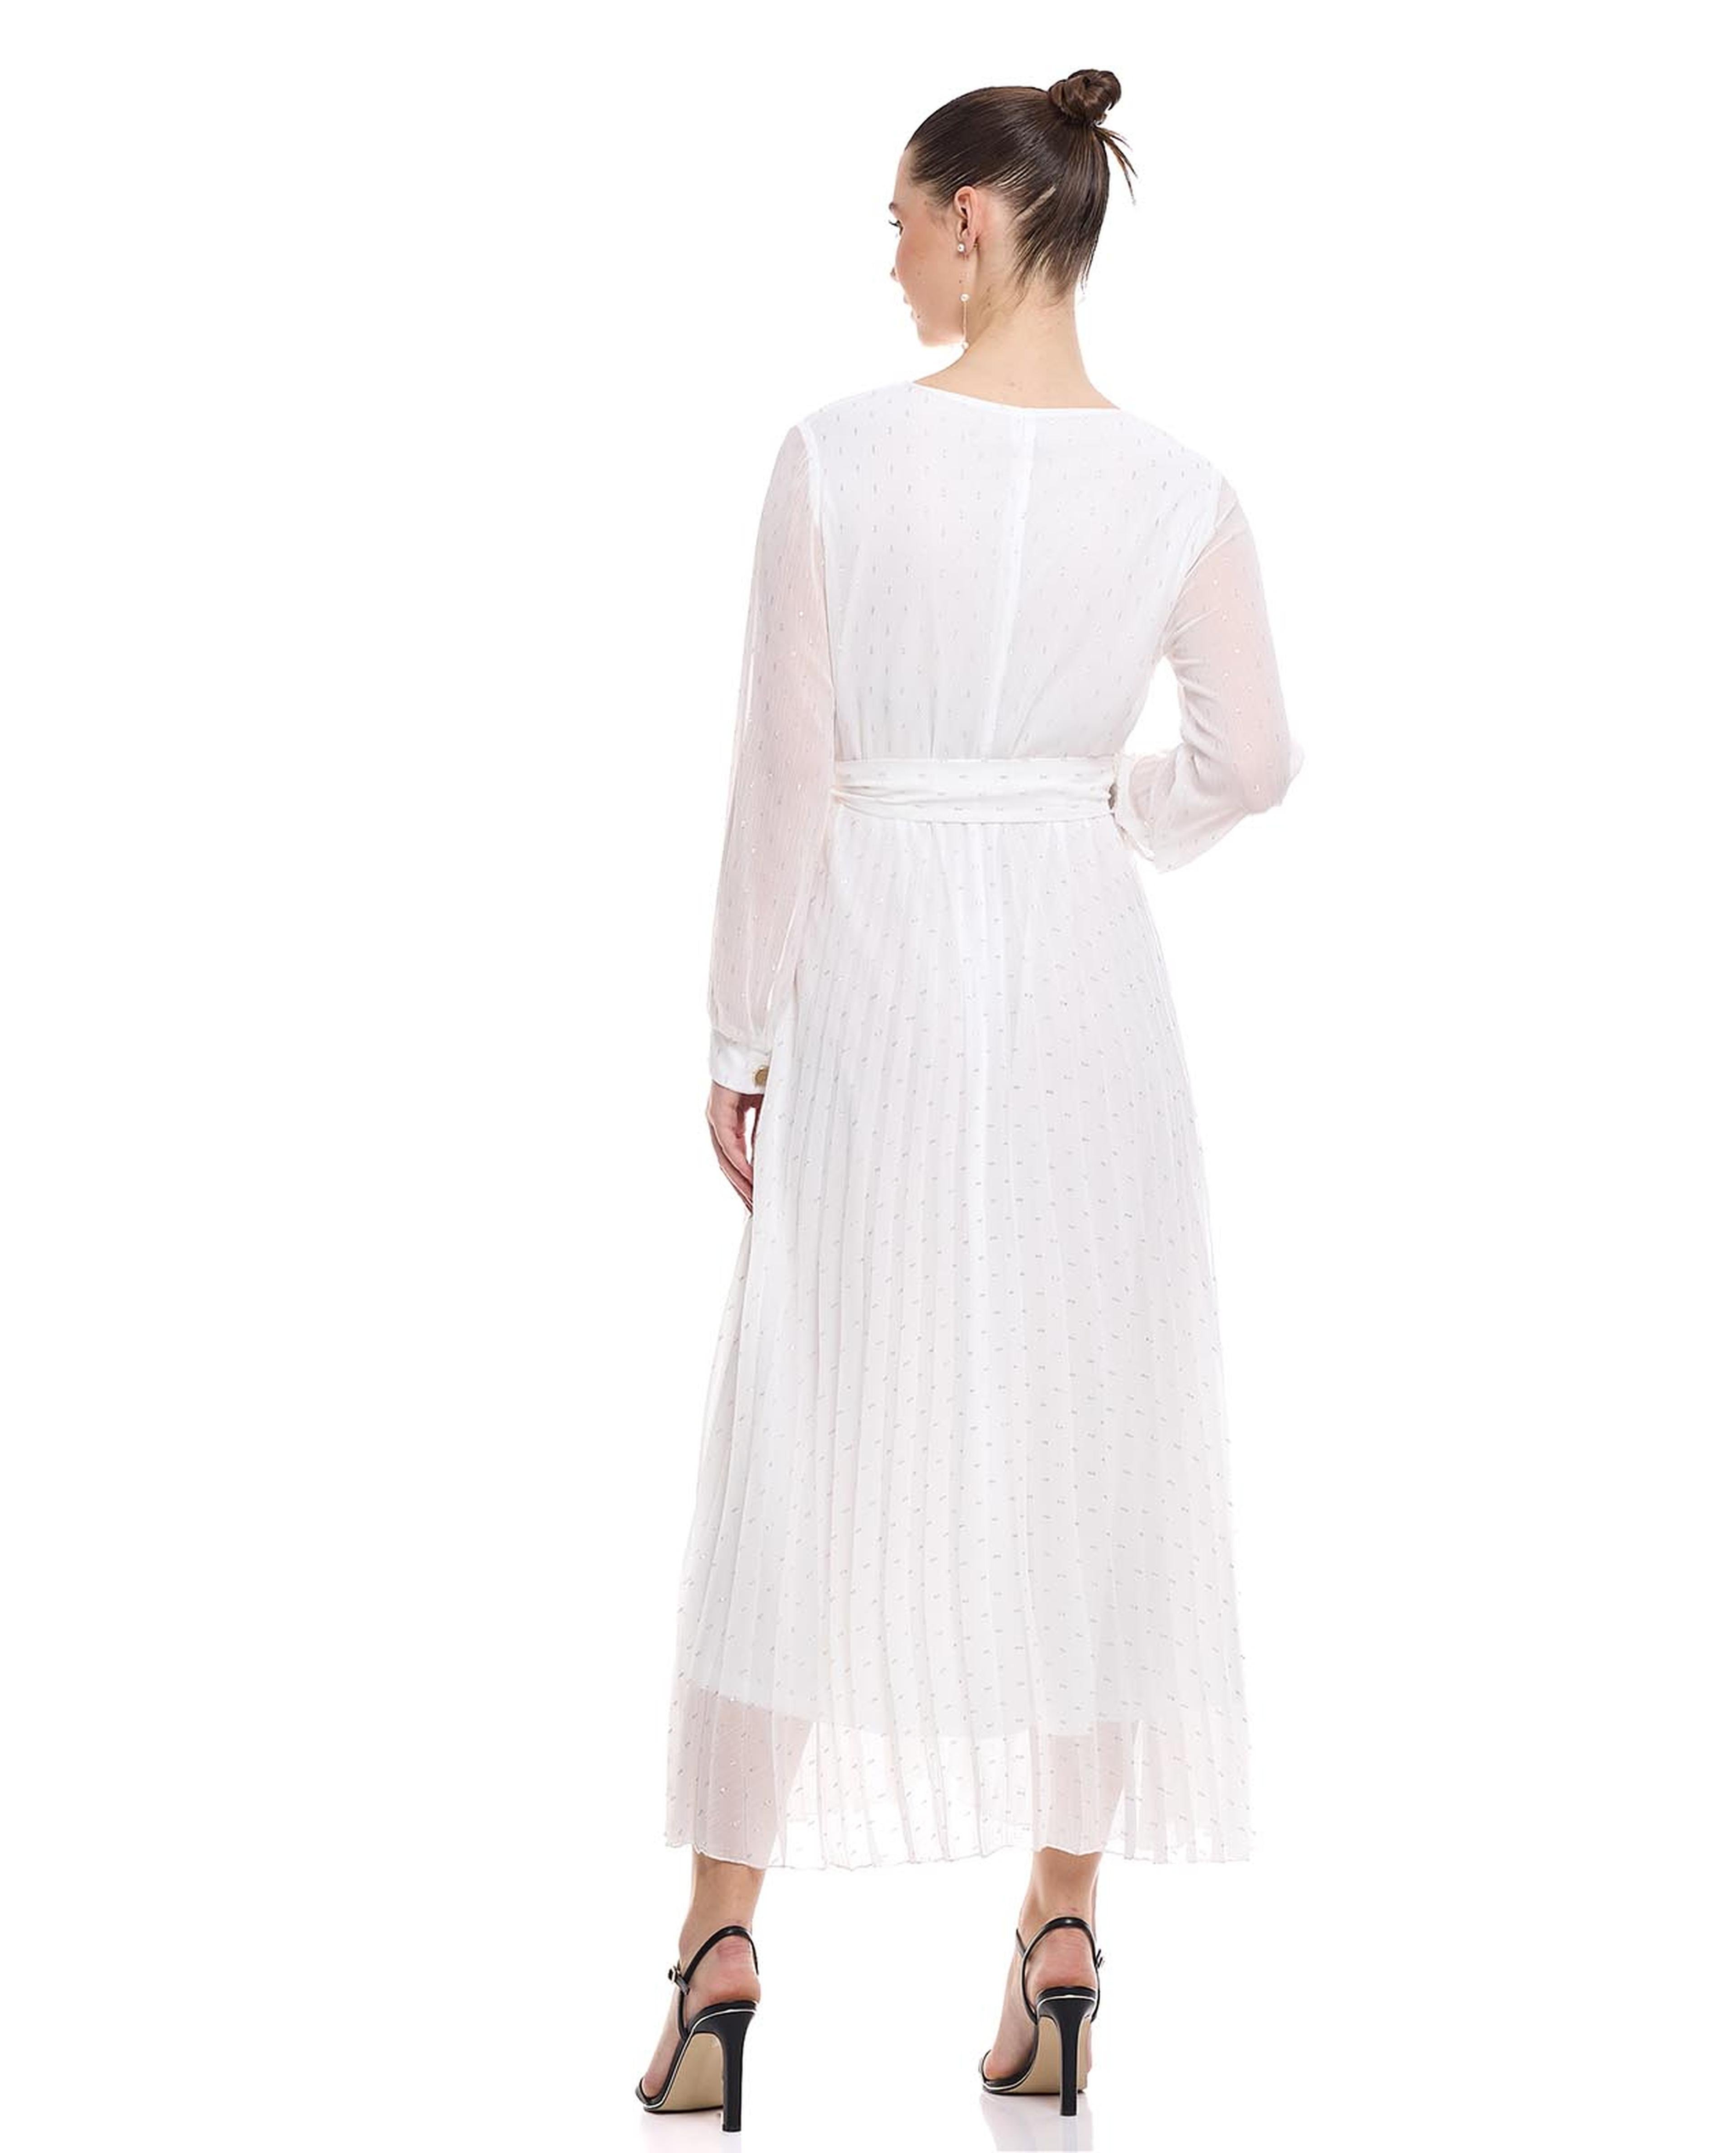 Self Patterned Midaxi Dress with V-Neck and Long Sleeves